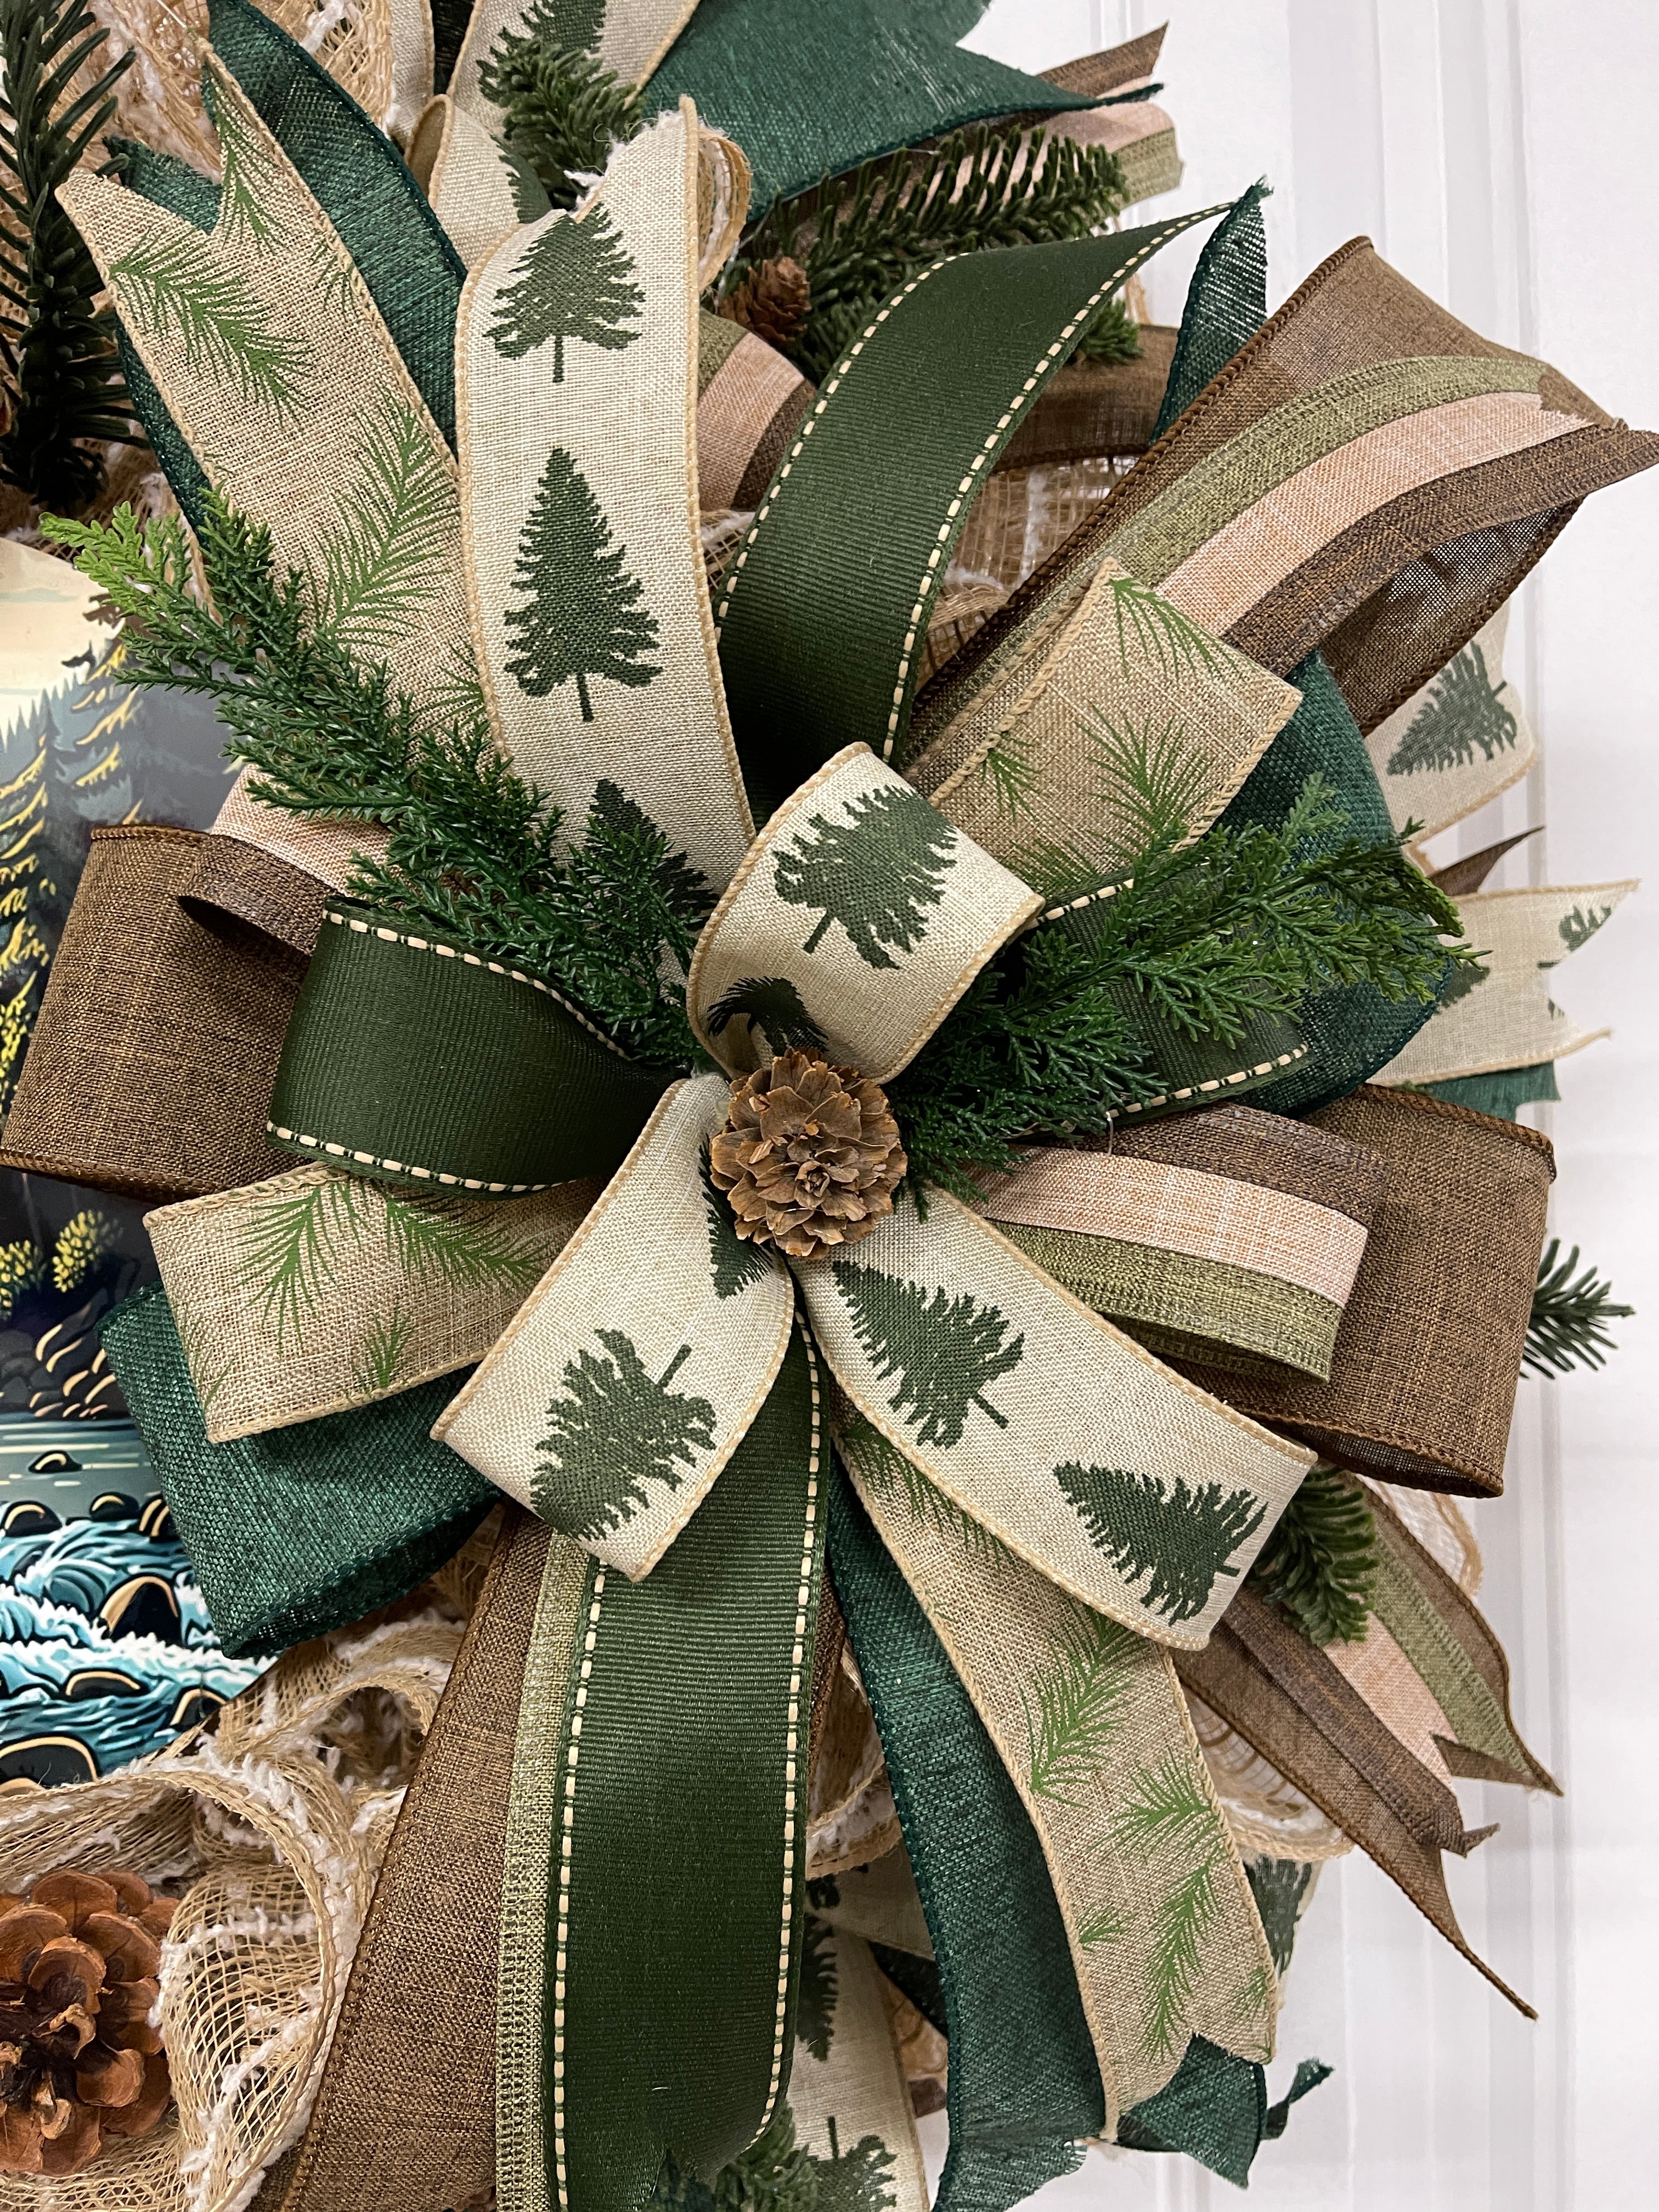 Close Up Detail of Bow with Pinecones, Pine Sprigs, and Ribbons with Pine Trees, and Pine Branches, along with Brown, Tan and Green